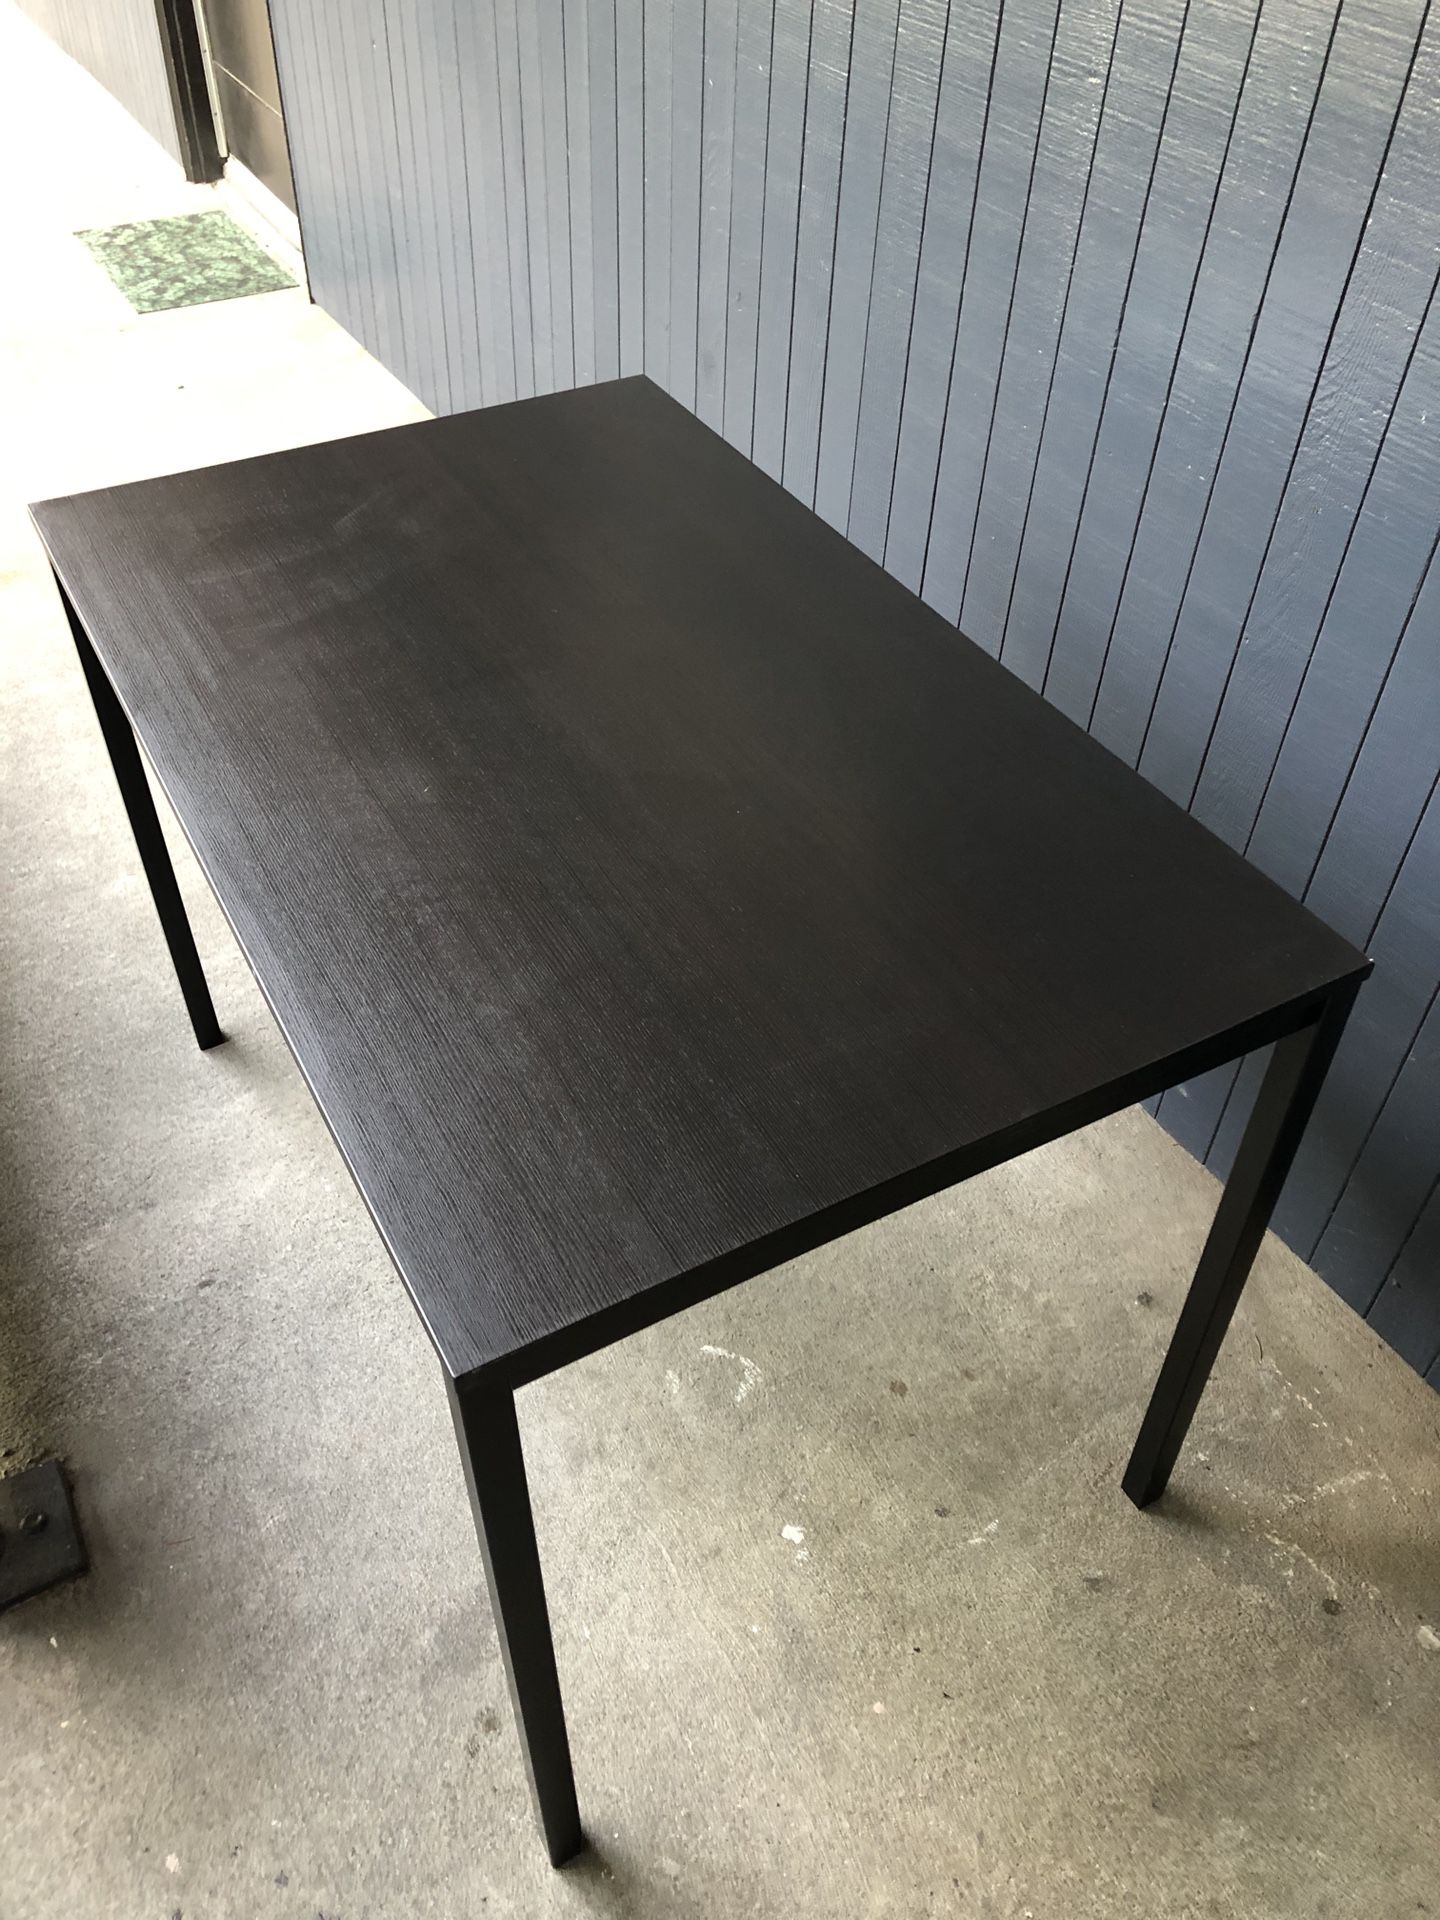 Black Table for Indoors! (Sturdy and Like New!)